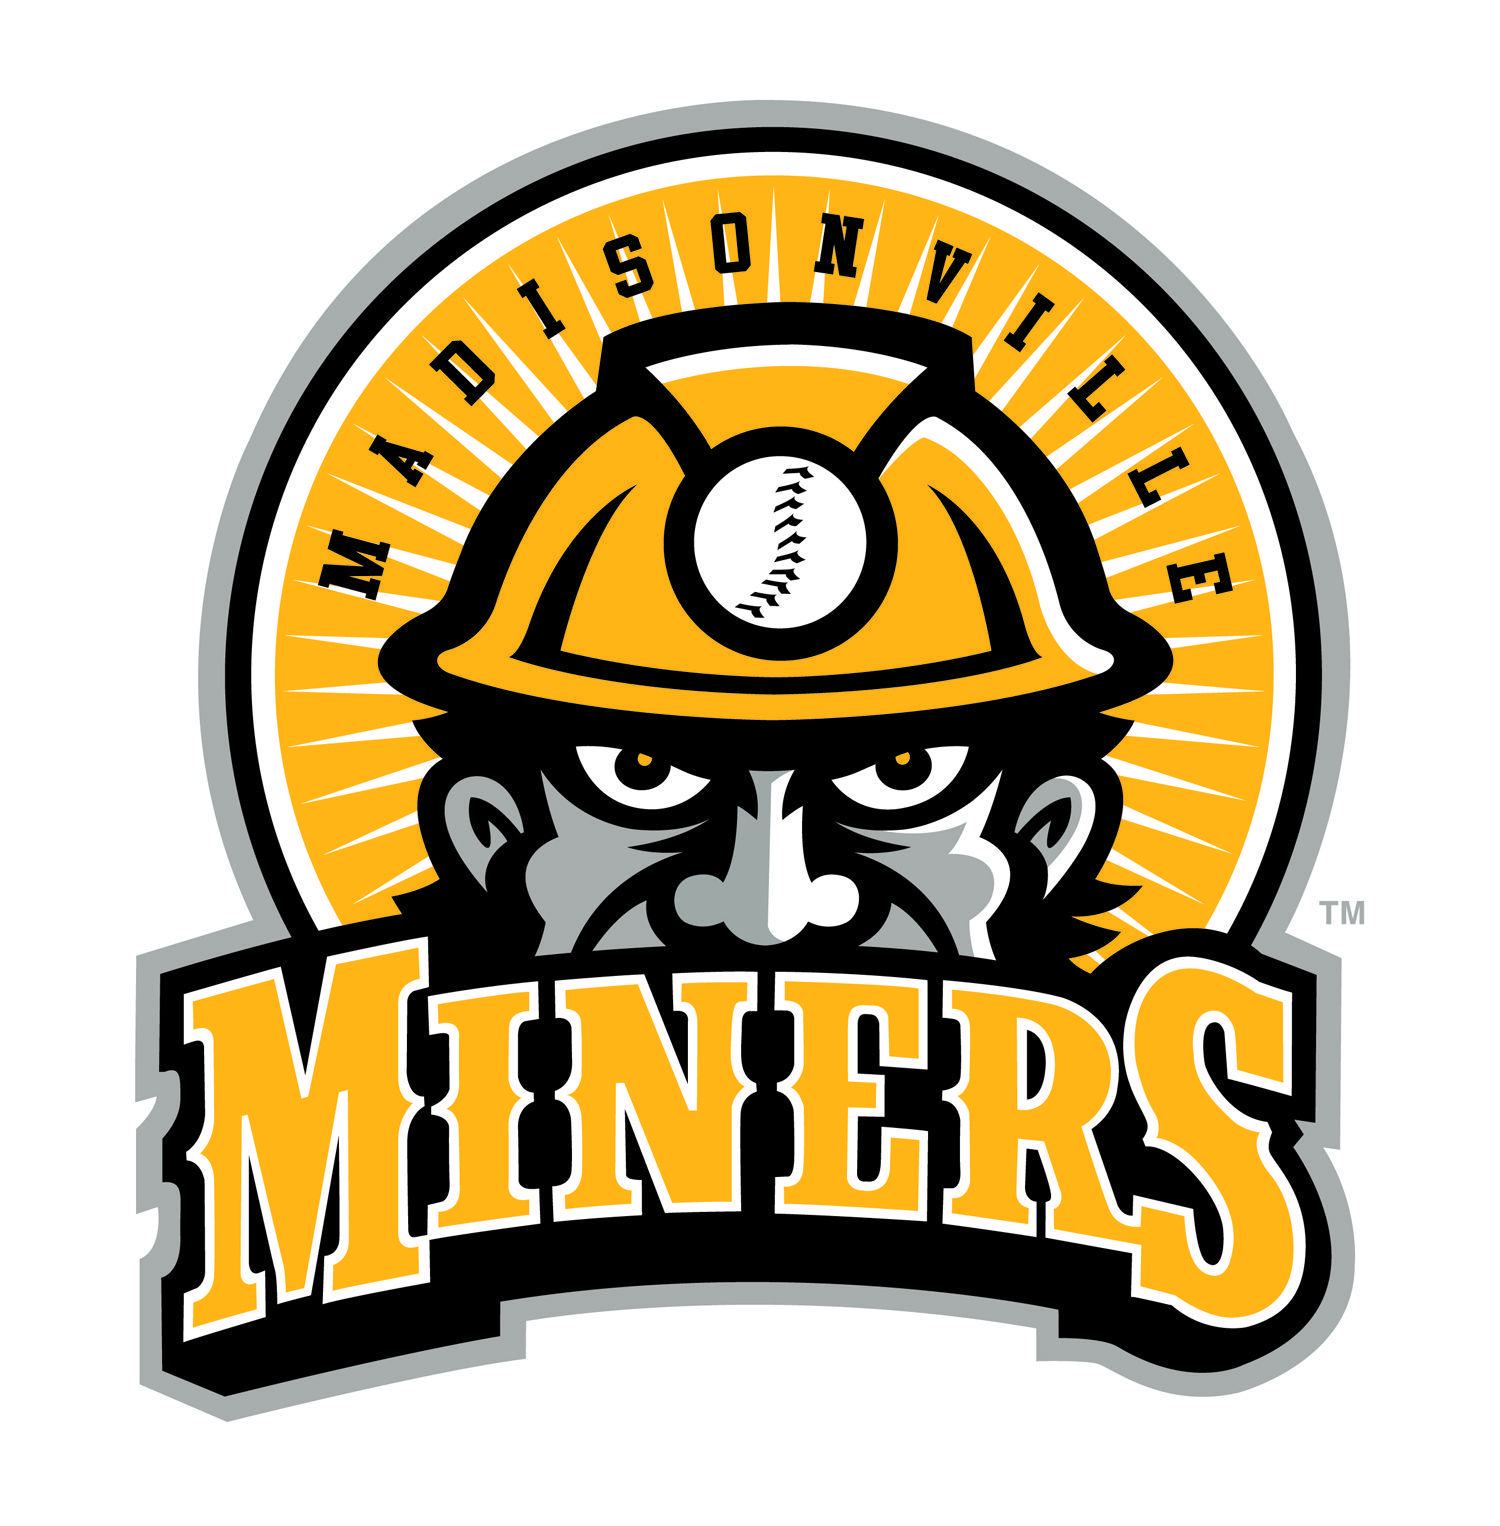 Miners Logo - Our New Madisonville Miner Logos Are Here!. Madisonville Miners